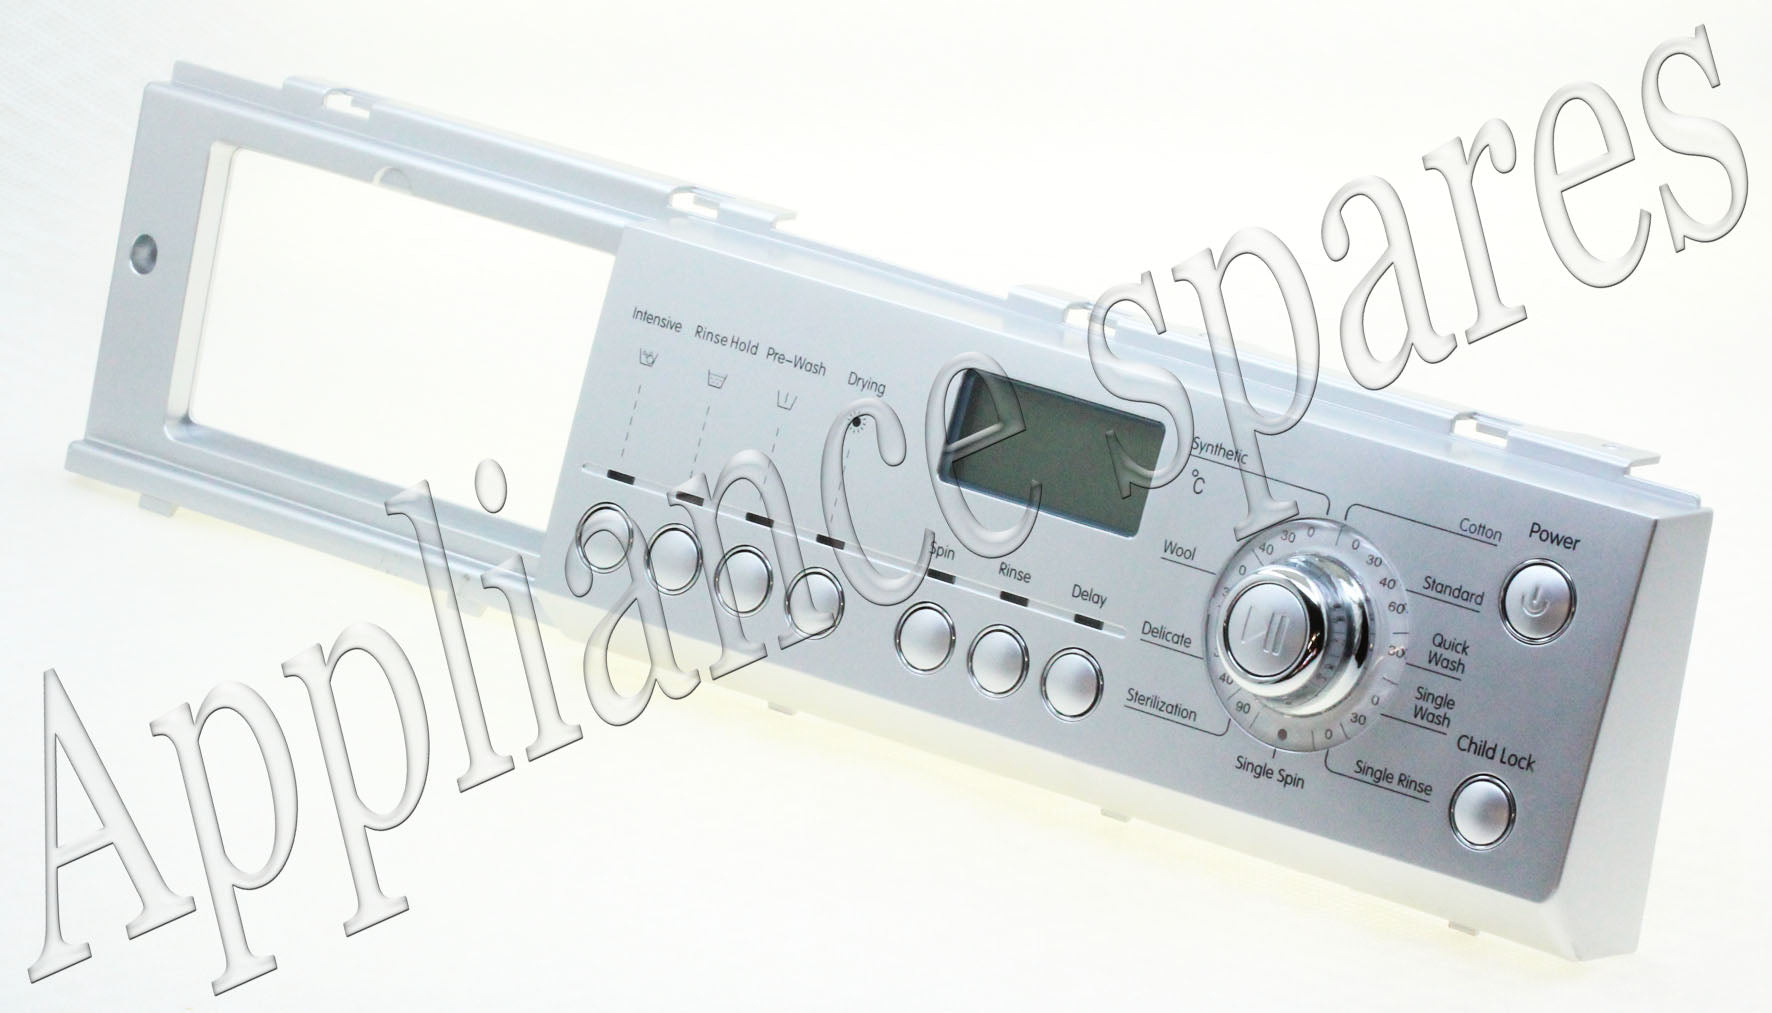 Kelvinator Washing Machine Control Panel Assembly Including Pc Board (Silver)